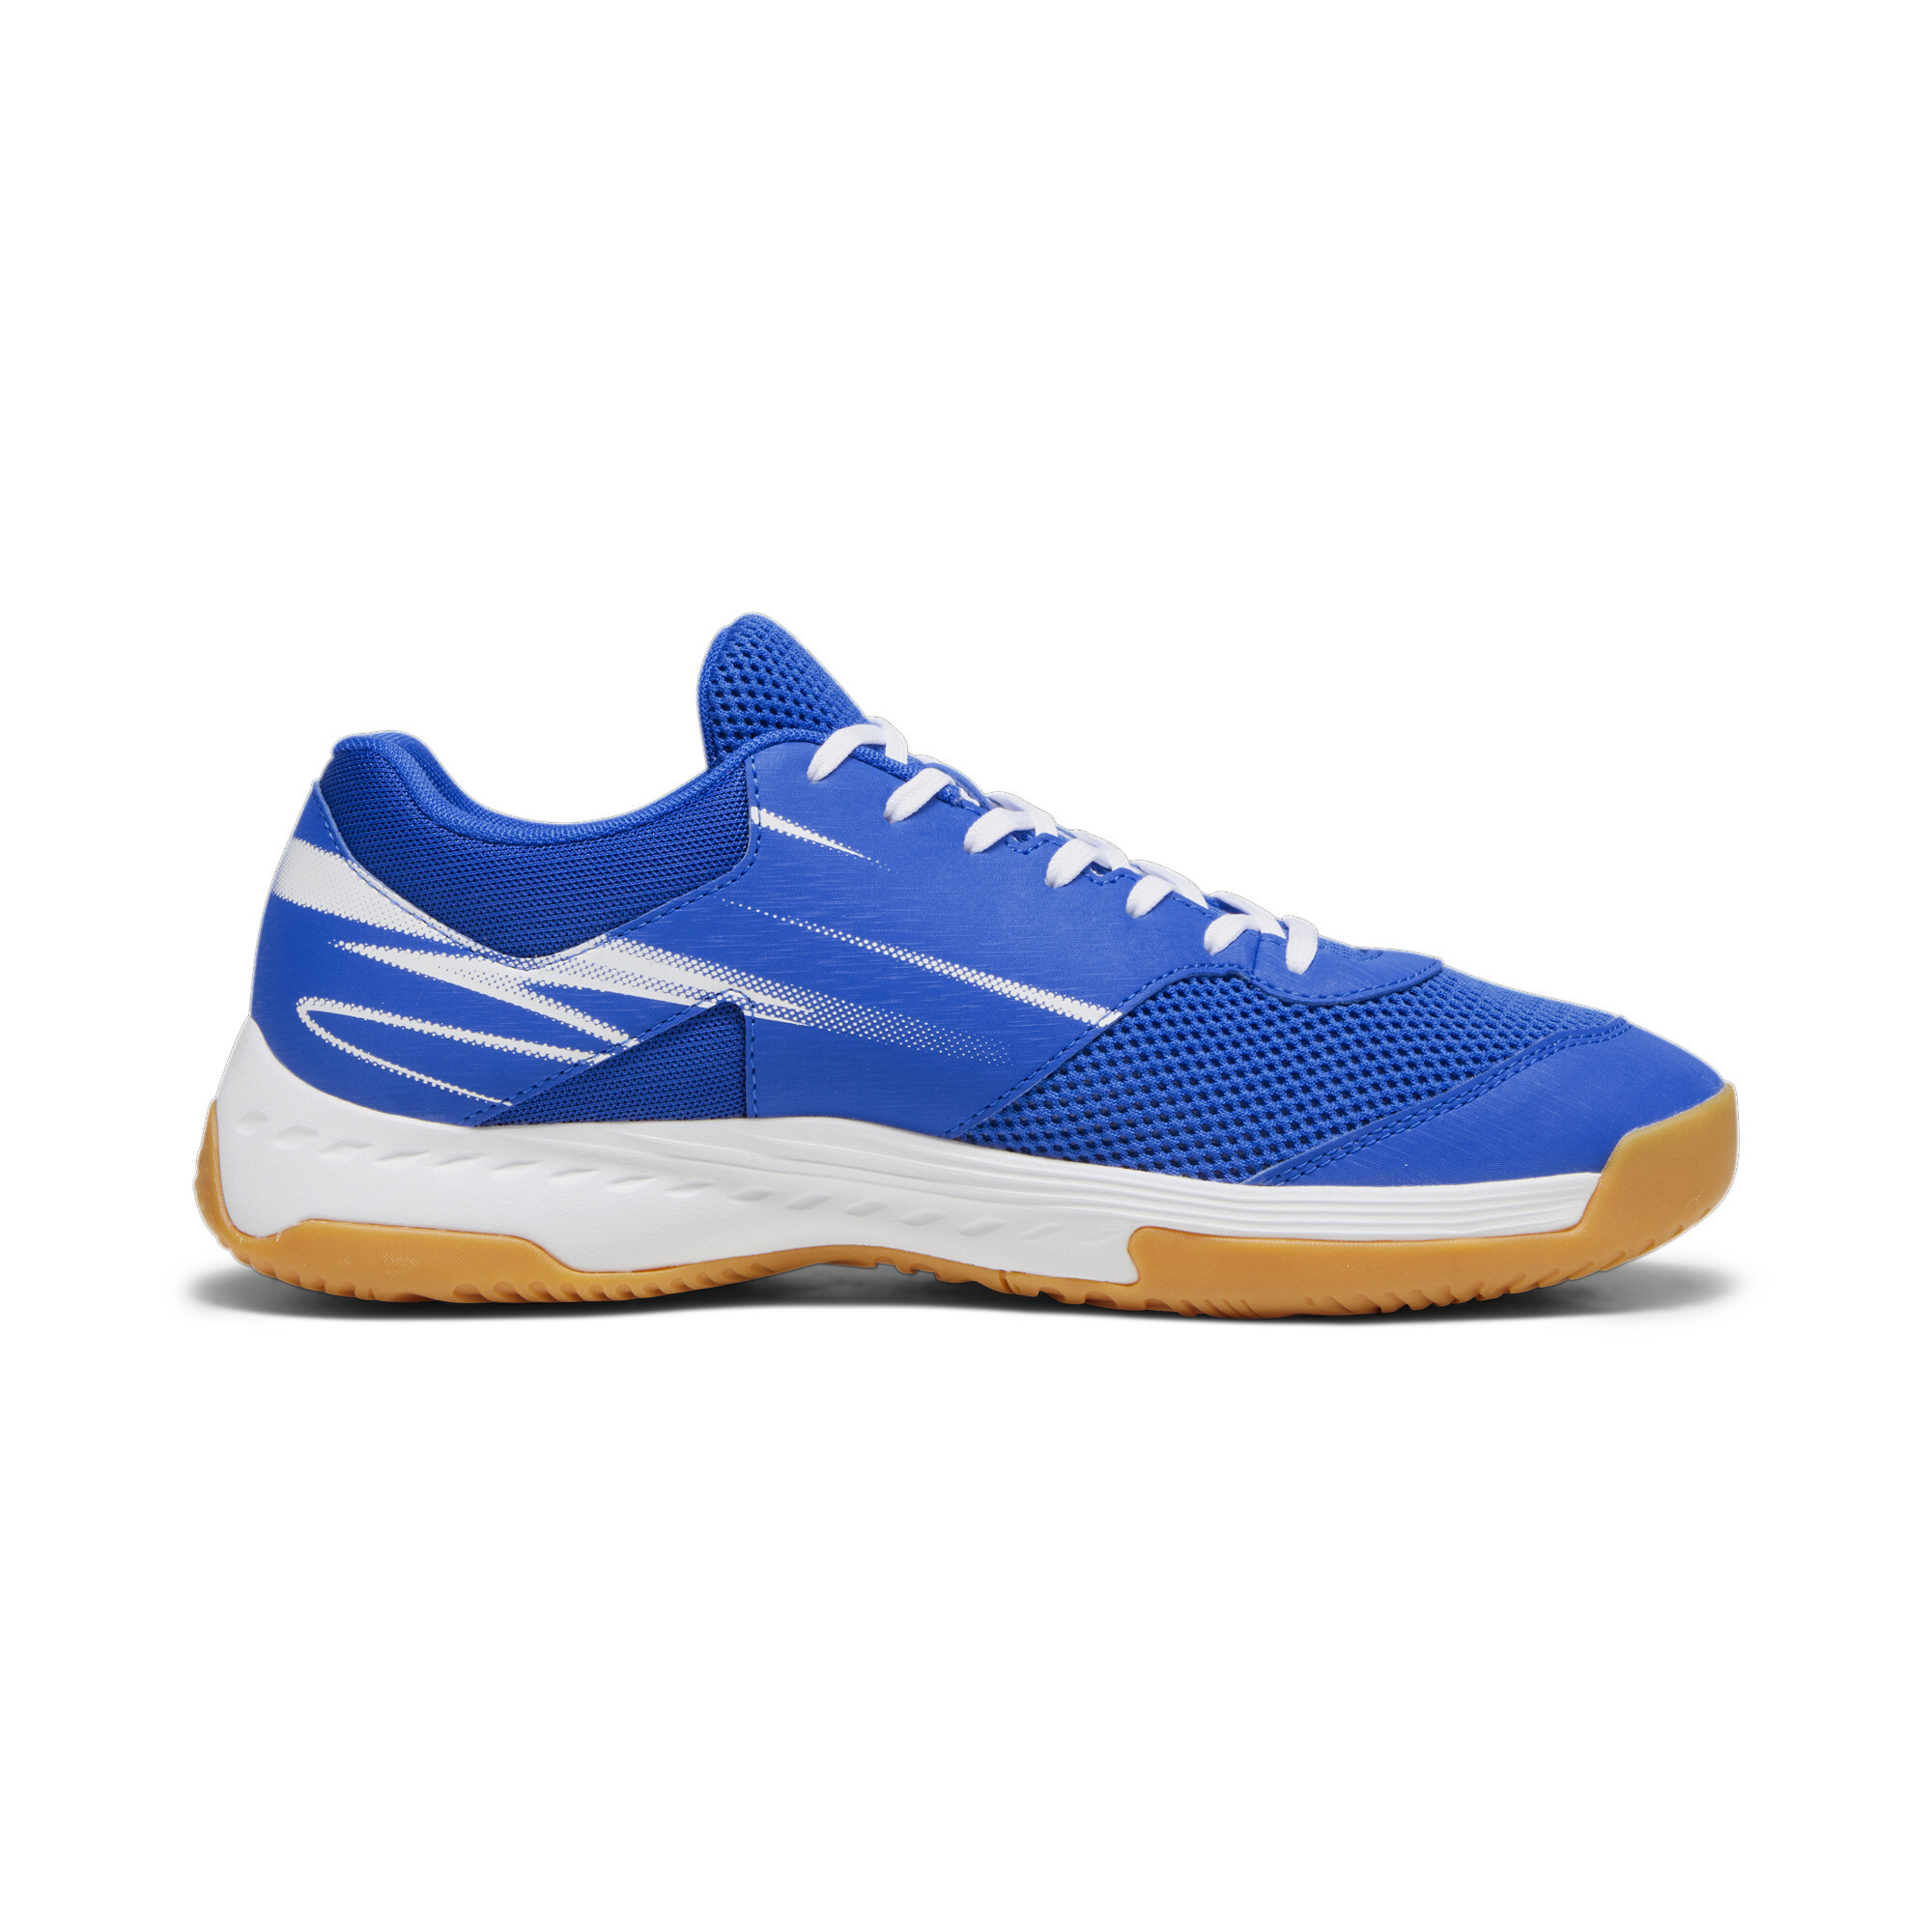 Puma Varion II Indoor Sports Shoes, Blue, Size 38, Shoes